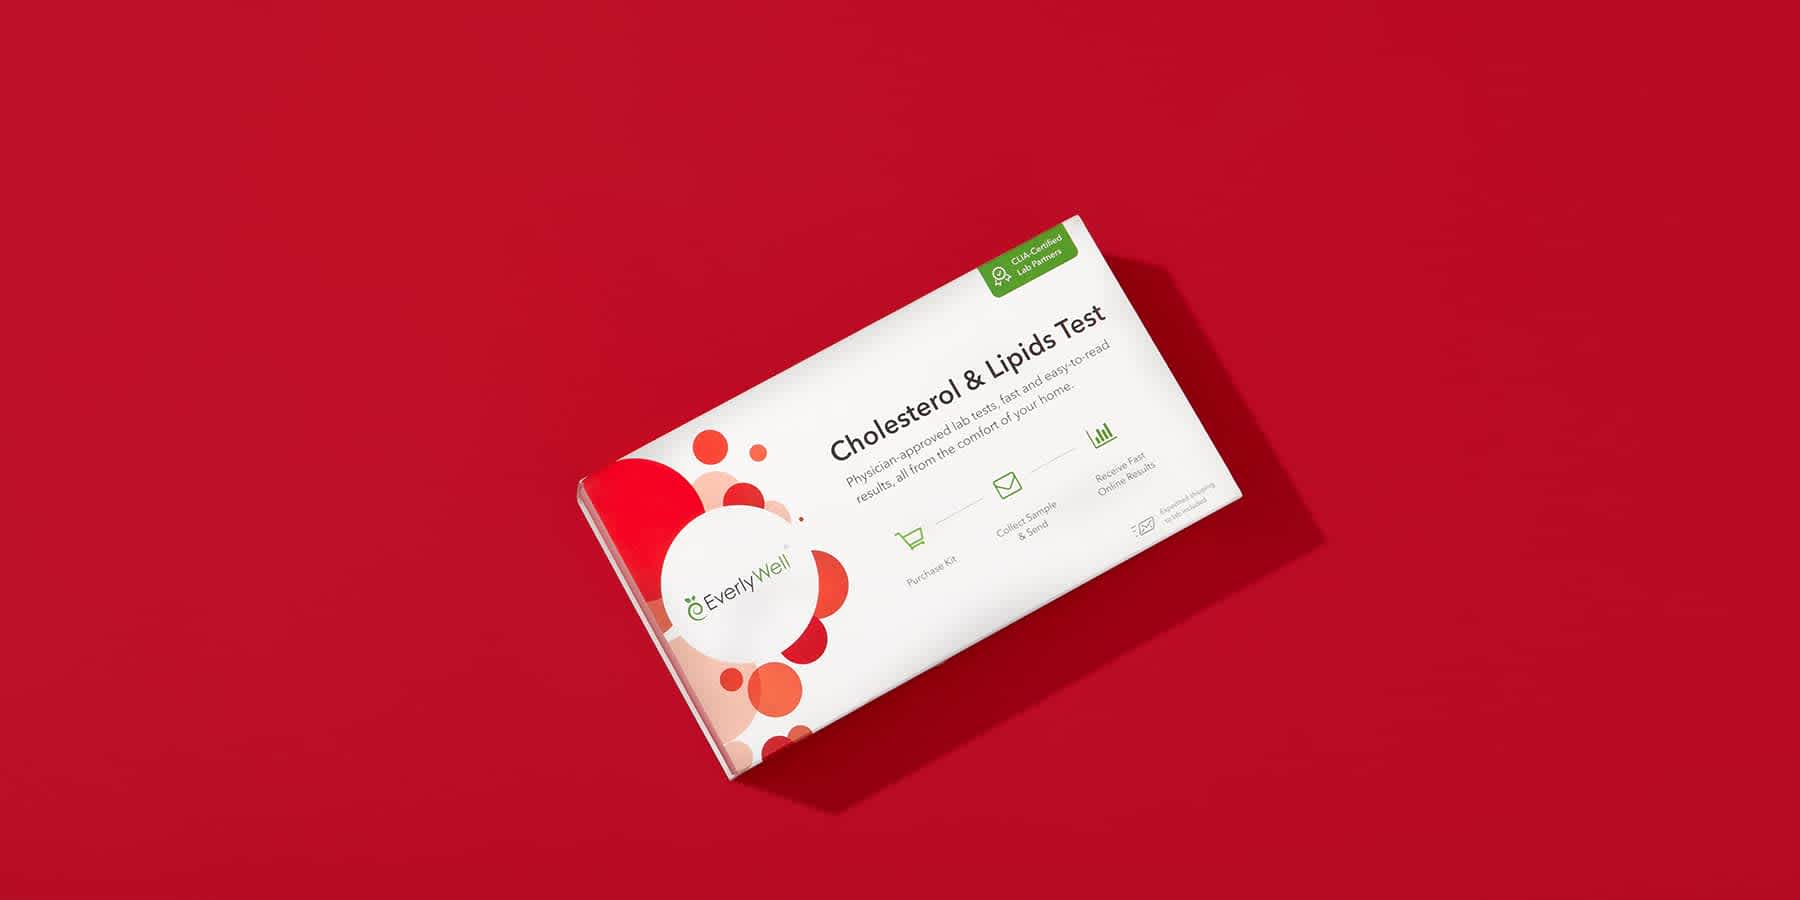 Everlywell Cholesterol Test box against a dark red background